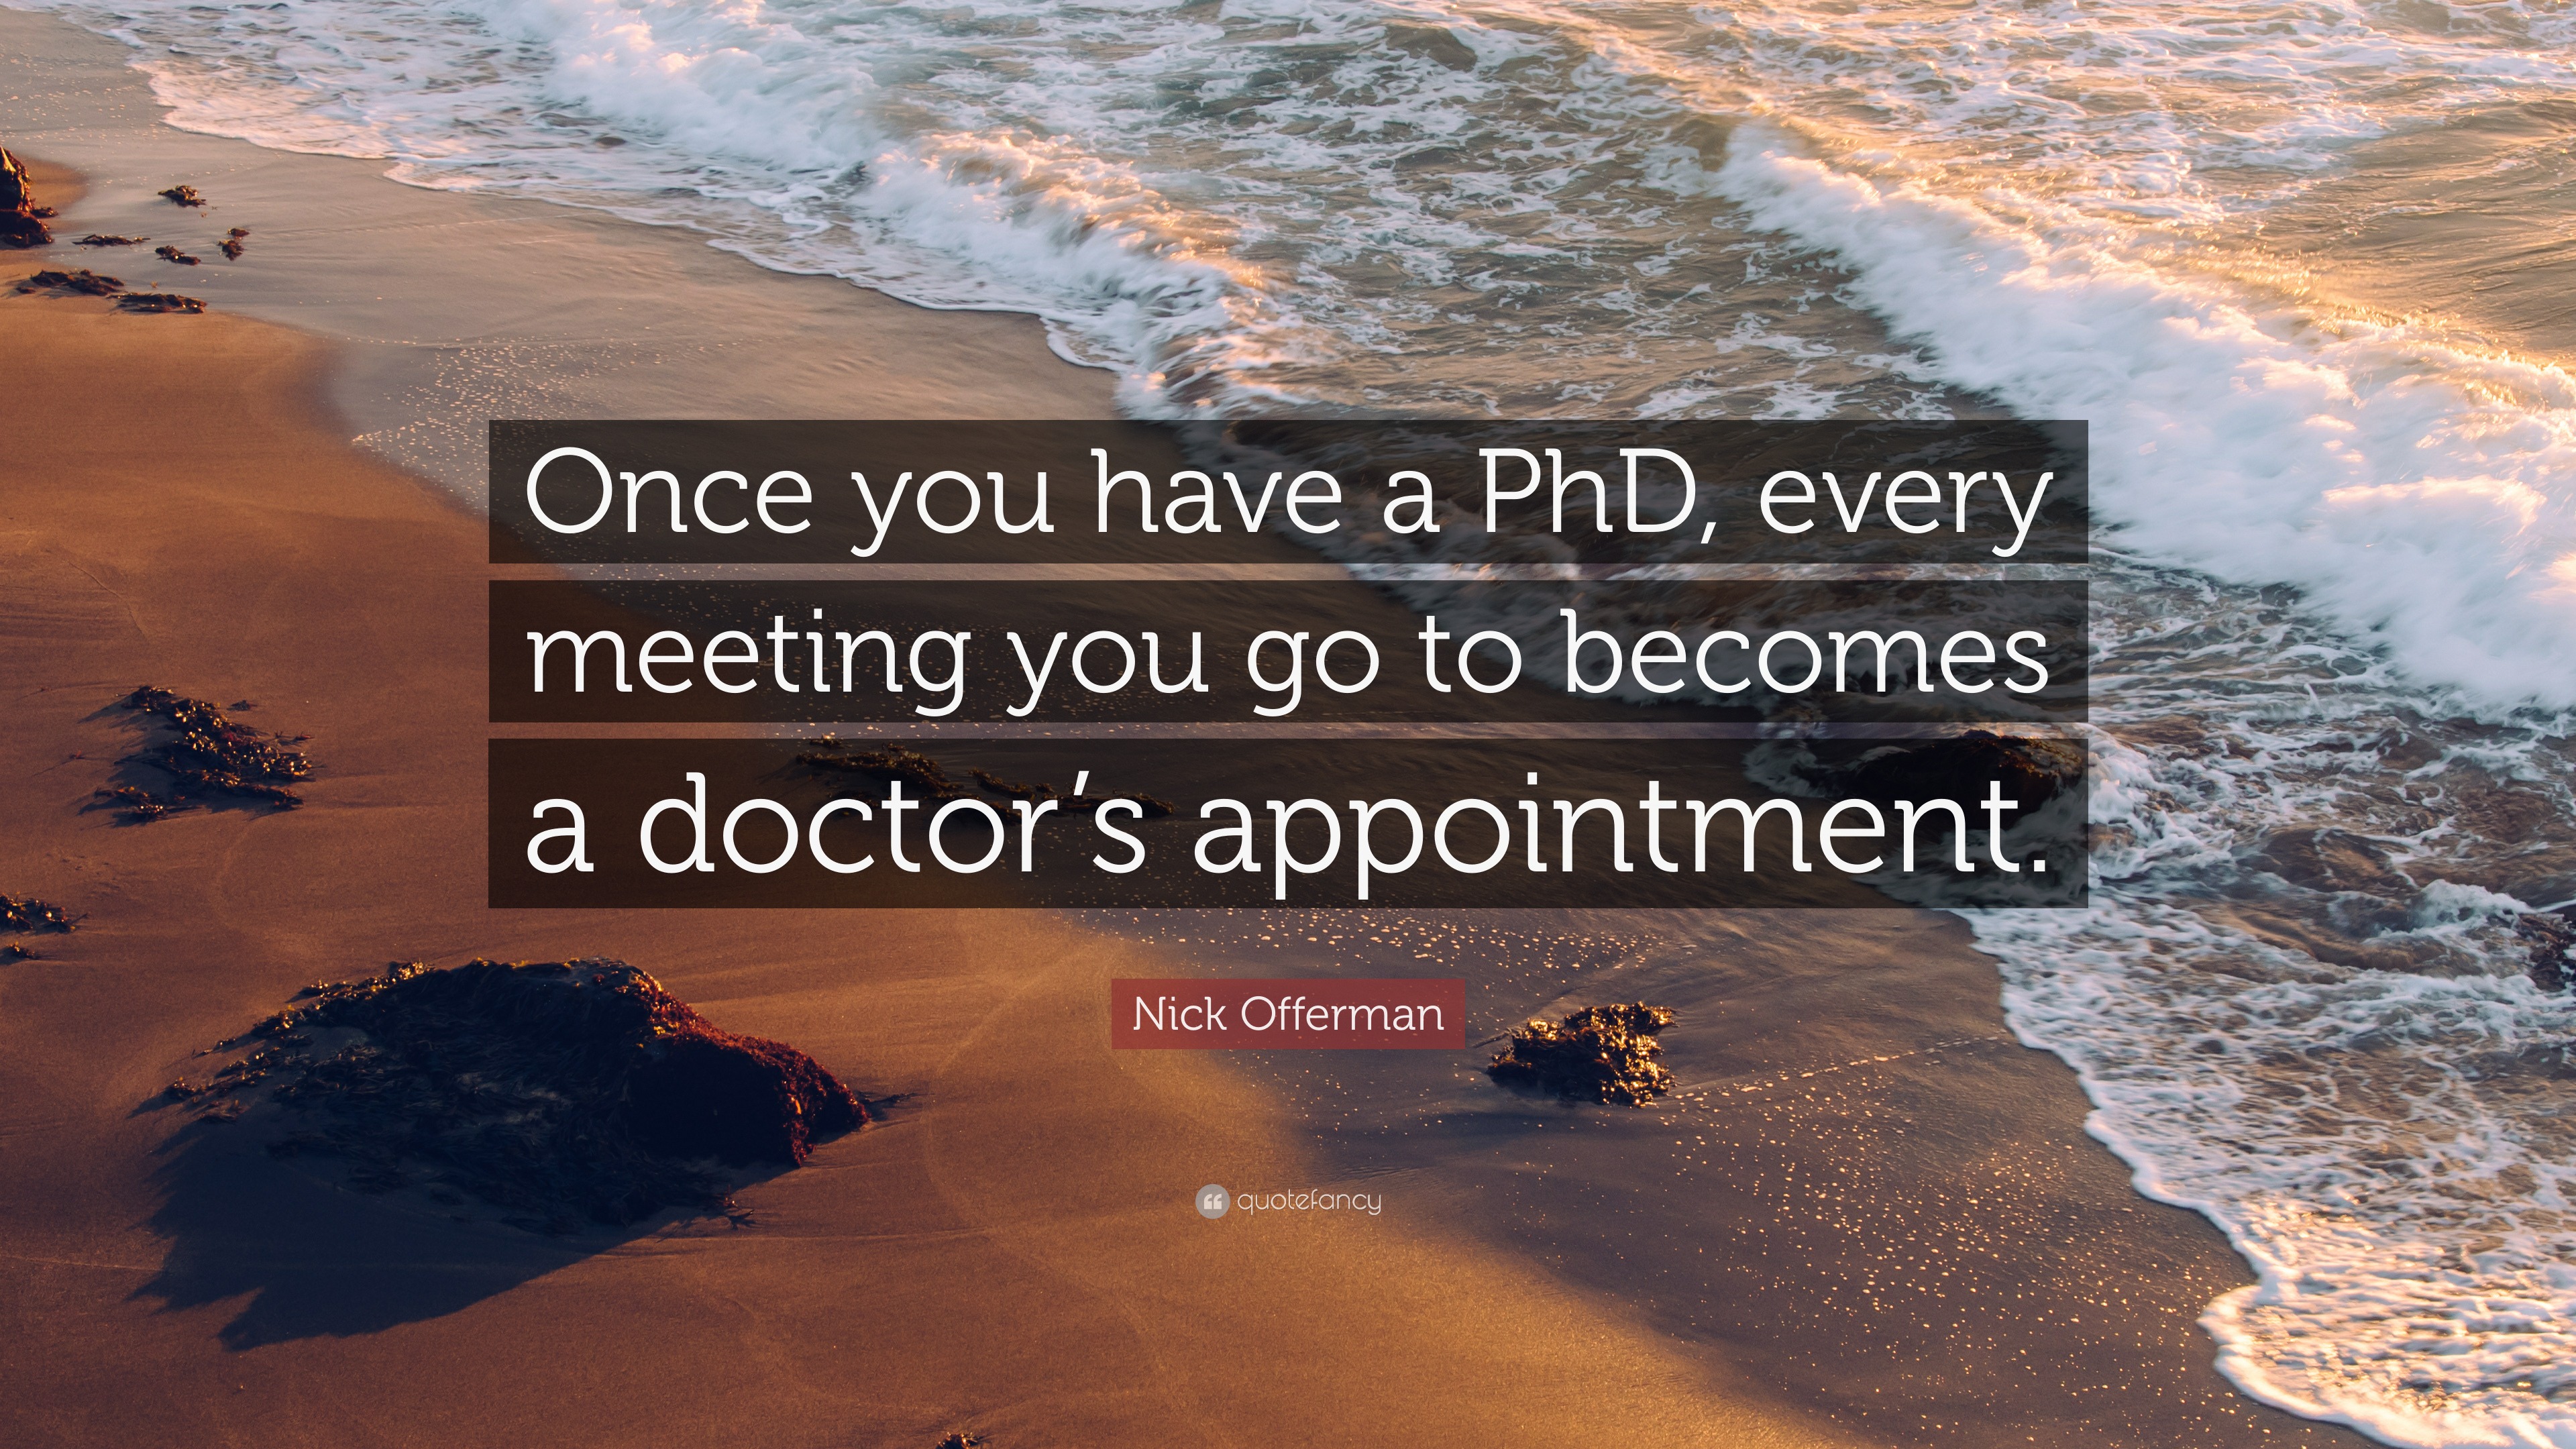 Nick Offerman Quote: “Once you have a PhD, every meeting you go to